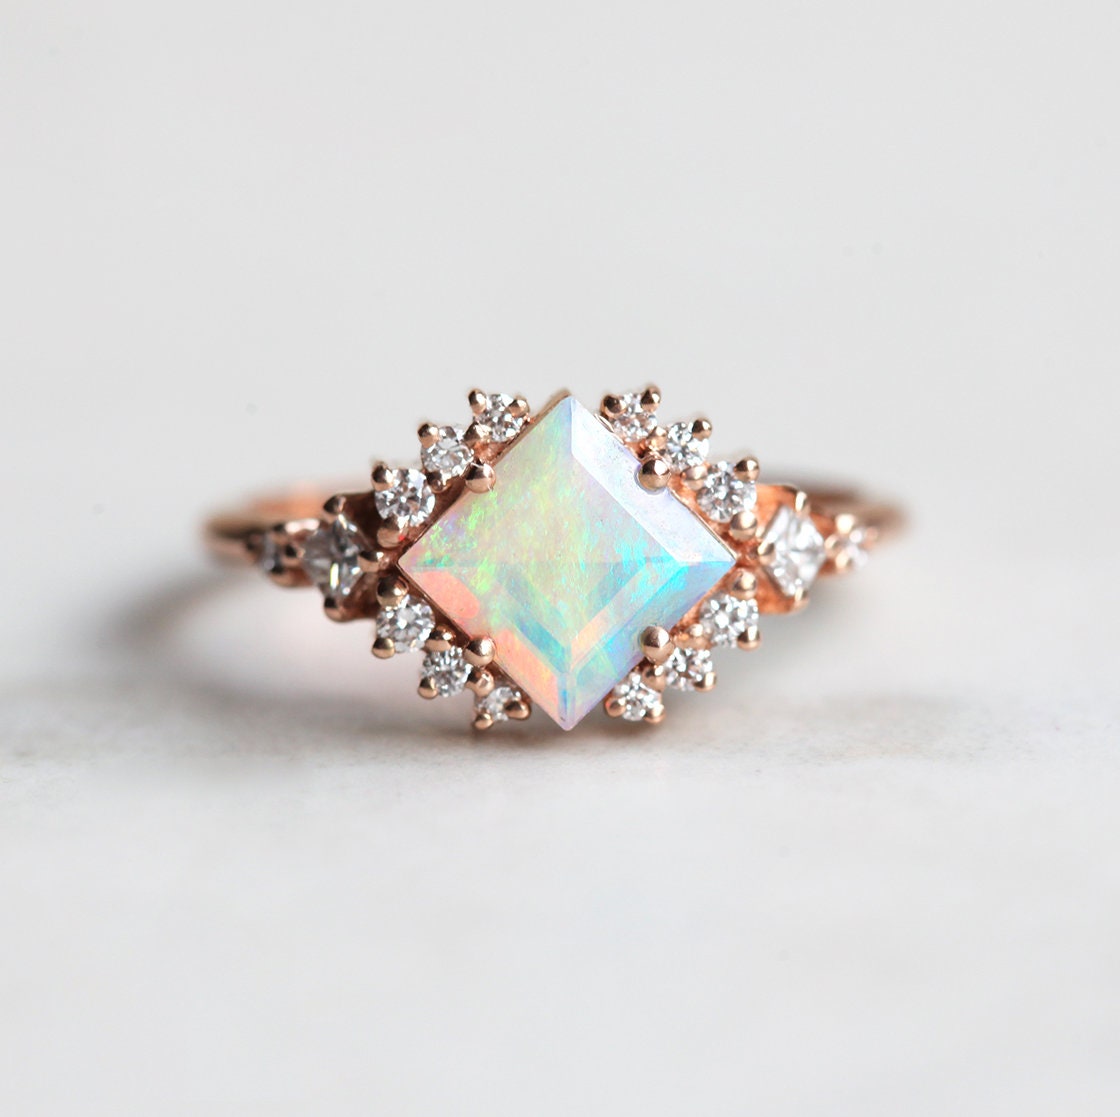 Square Opal Halo Ring with Princess-Cut and Round White Diamonds Surrounding The Centerpiece Gemstone